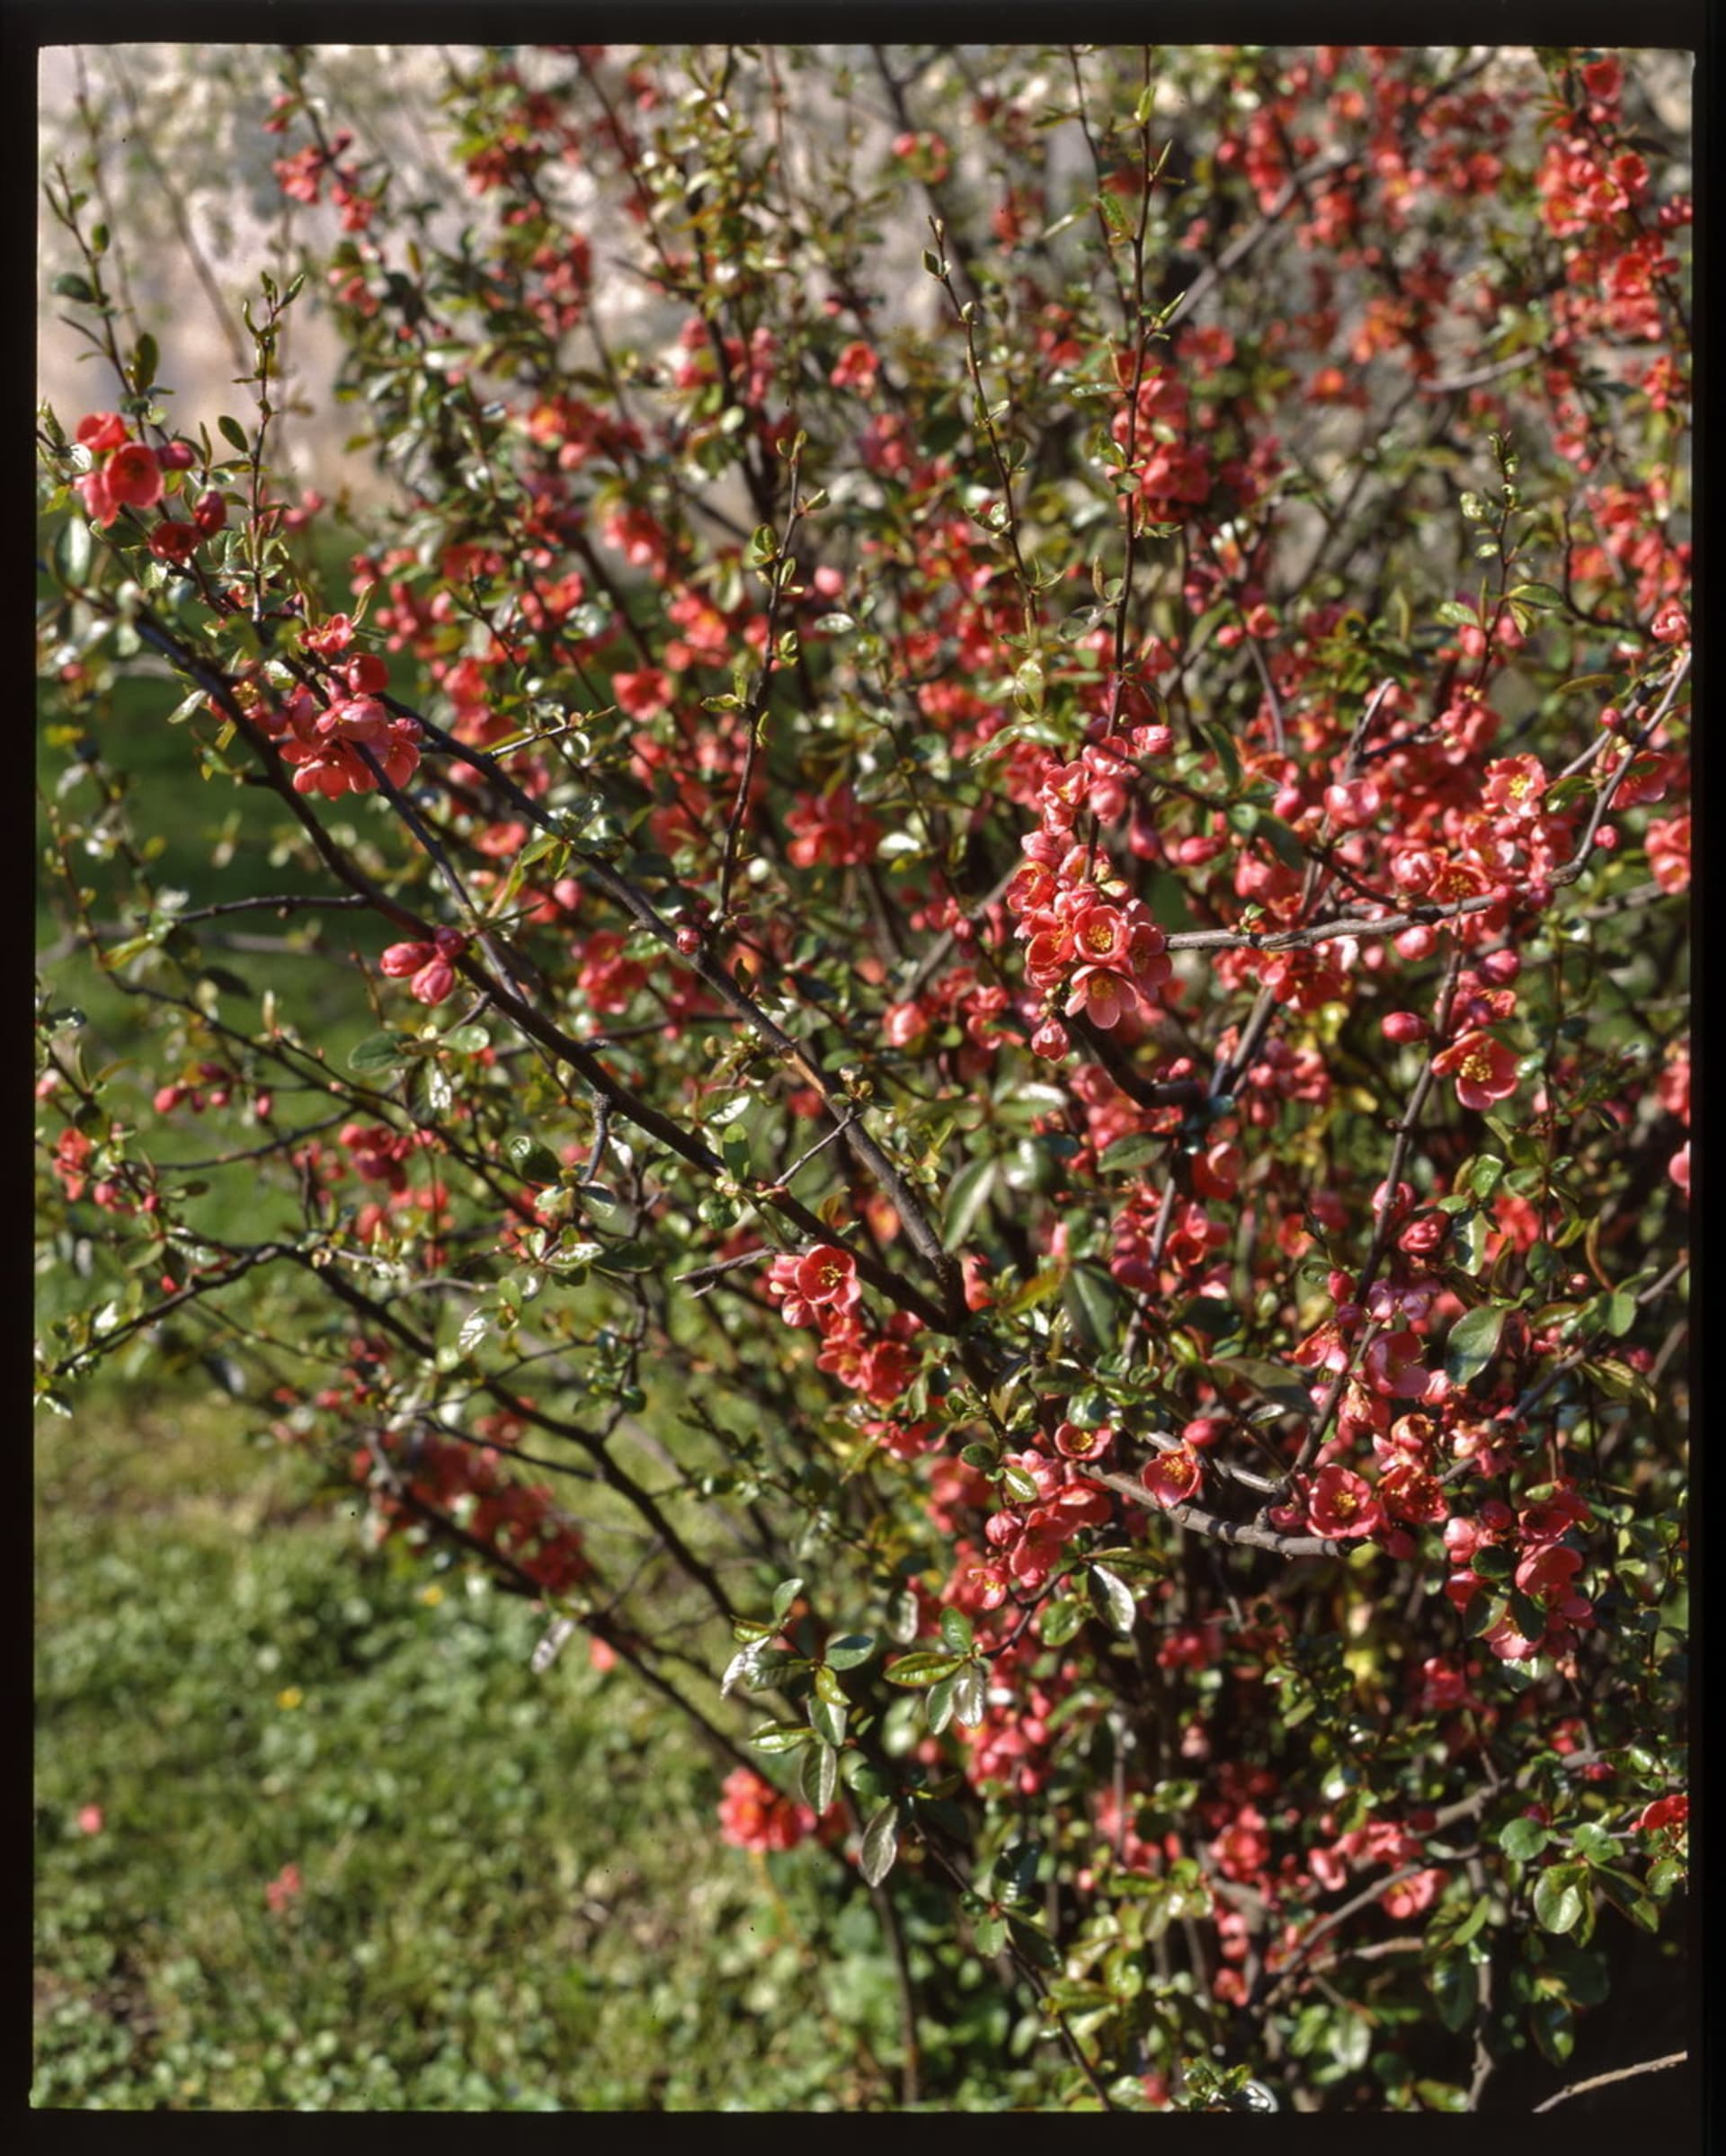 Kdoulovec/Chaenomeles japonica